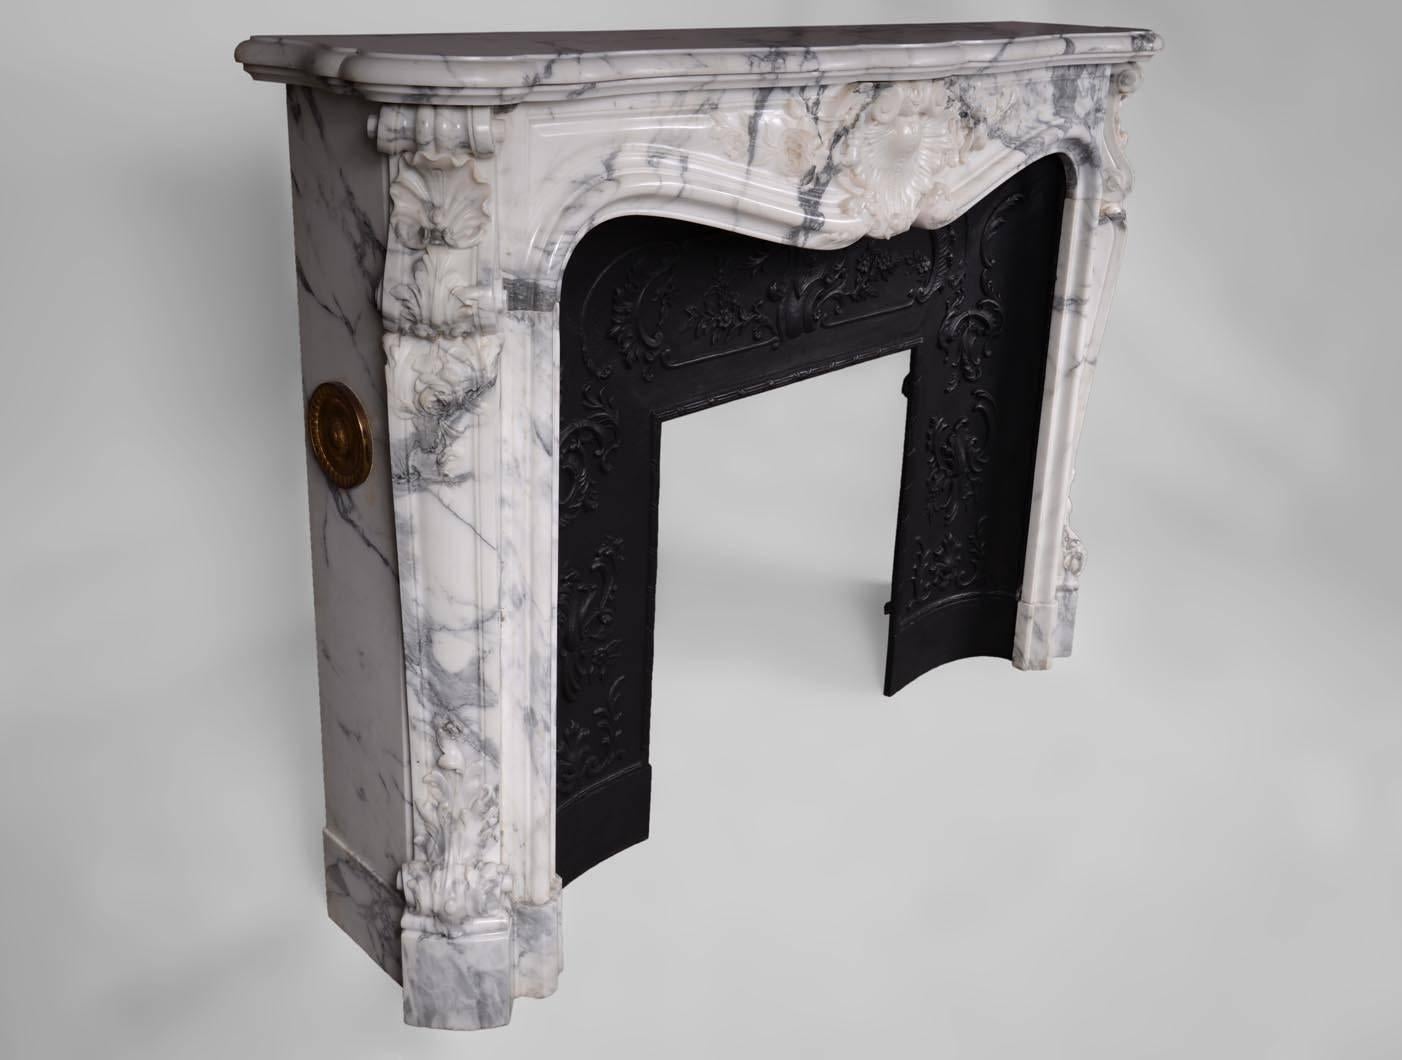 19th Century Antique Louis XV Style Fireplace in Arabescato Marble with Cast Iron Insert